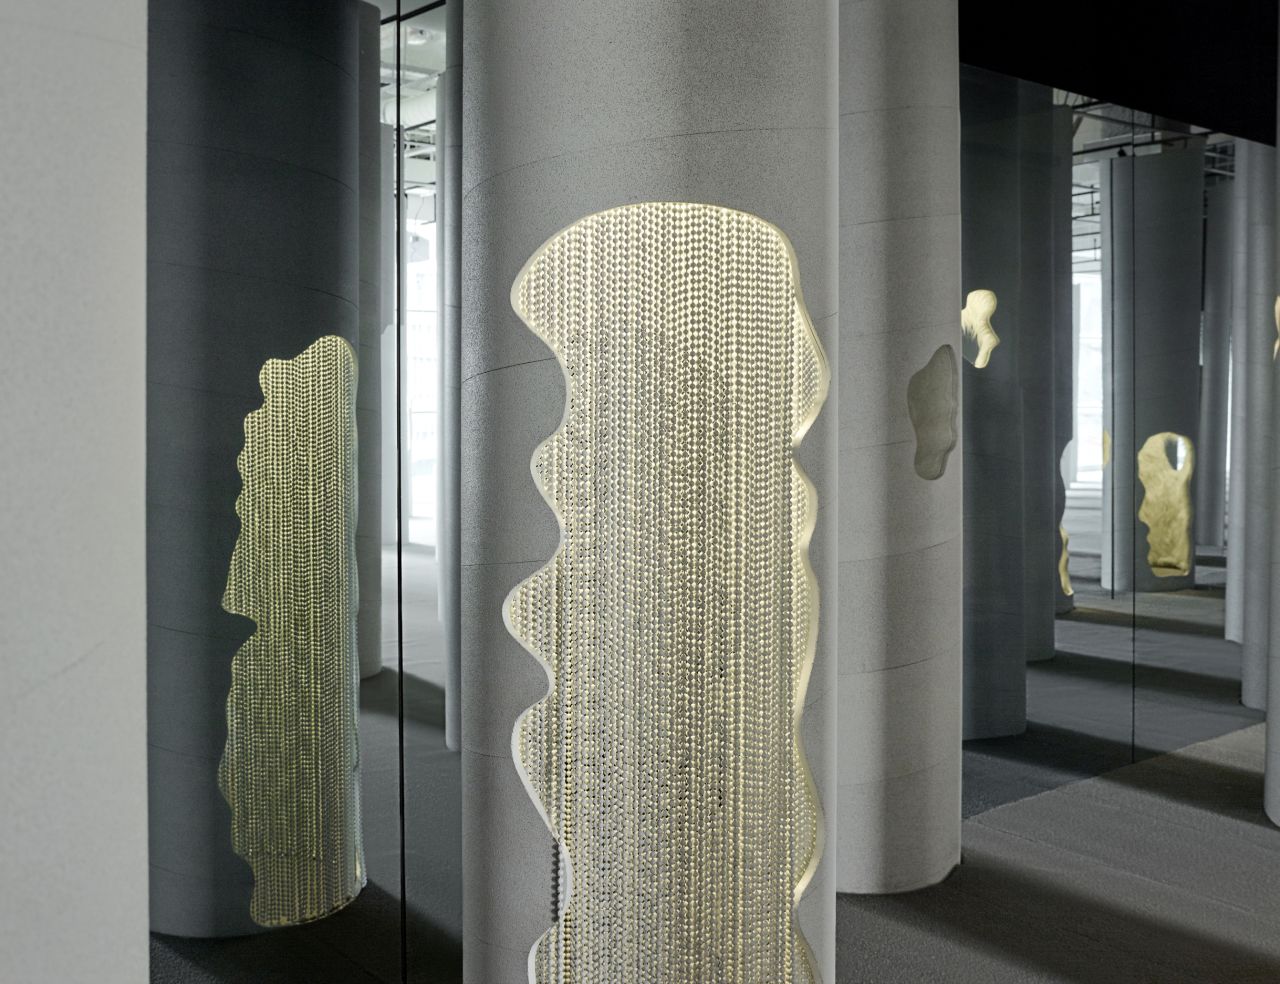 The "Lost and Found" exhibition features a grid-like forest of white columns that emerge from the ground at varying levels like stalagmites.